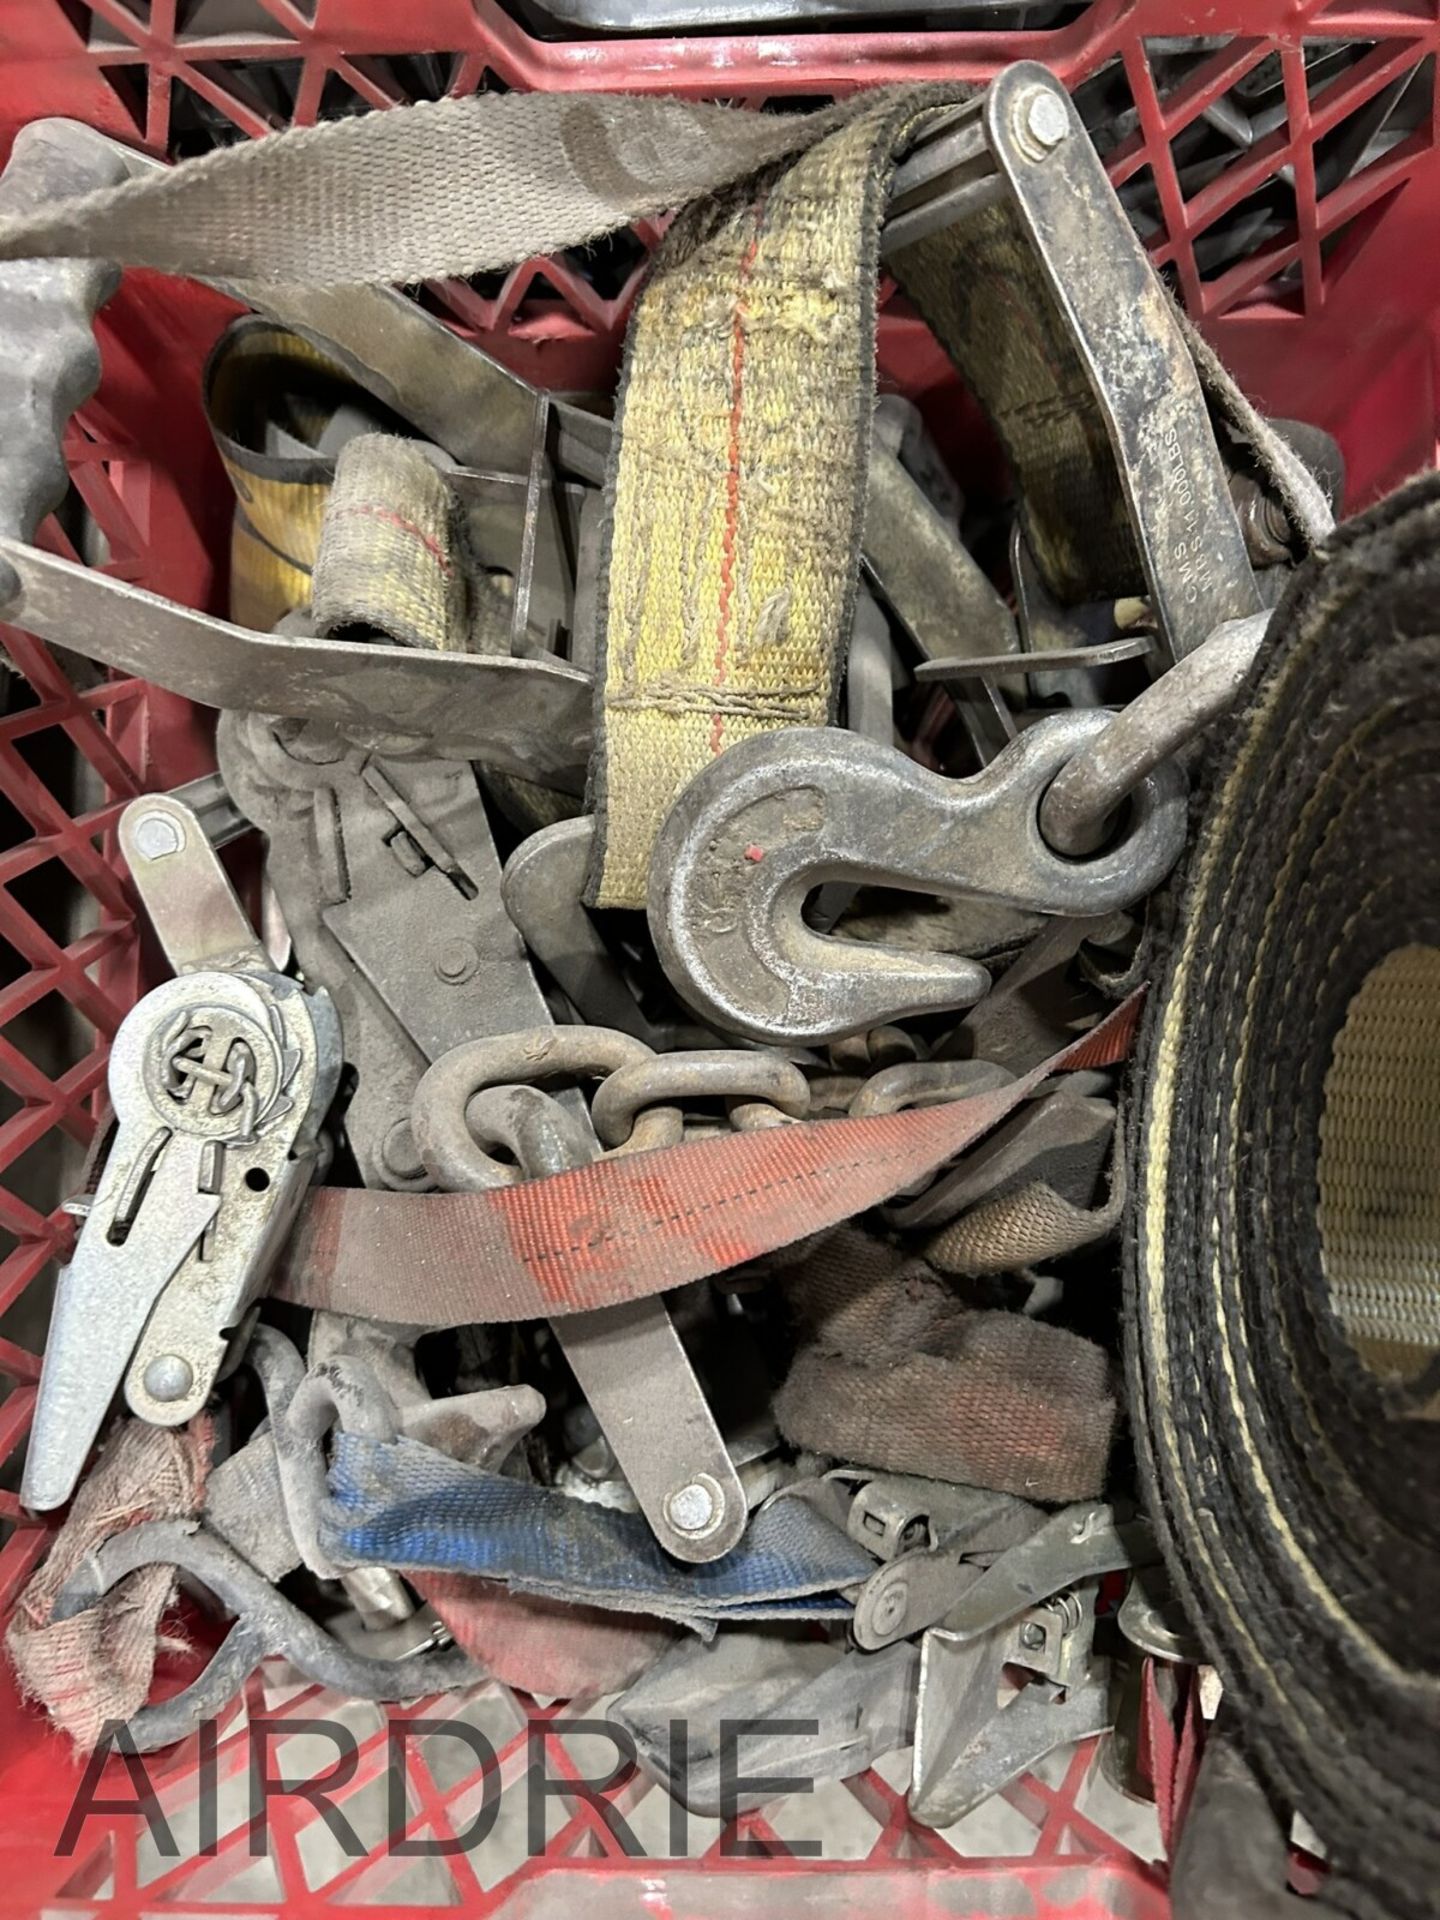 *OFFSITE* L/O ASSORTED RATCHET STRAPS AND TIE DOWNS - Image 4 of 6